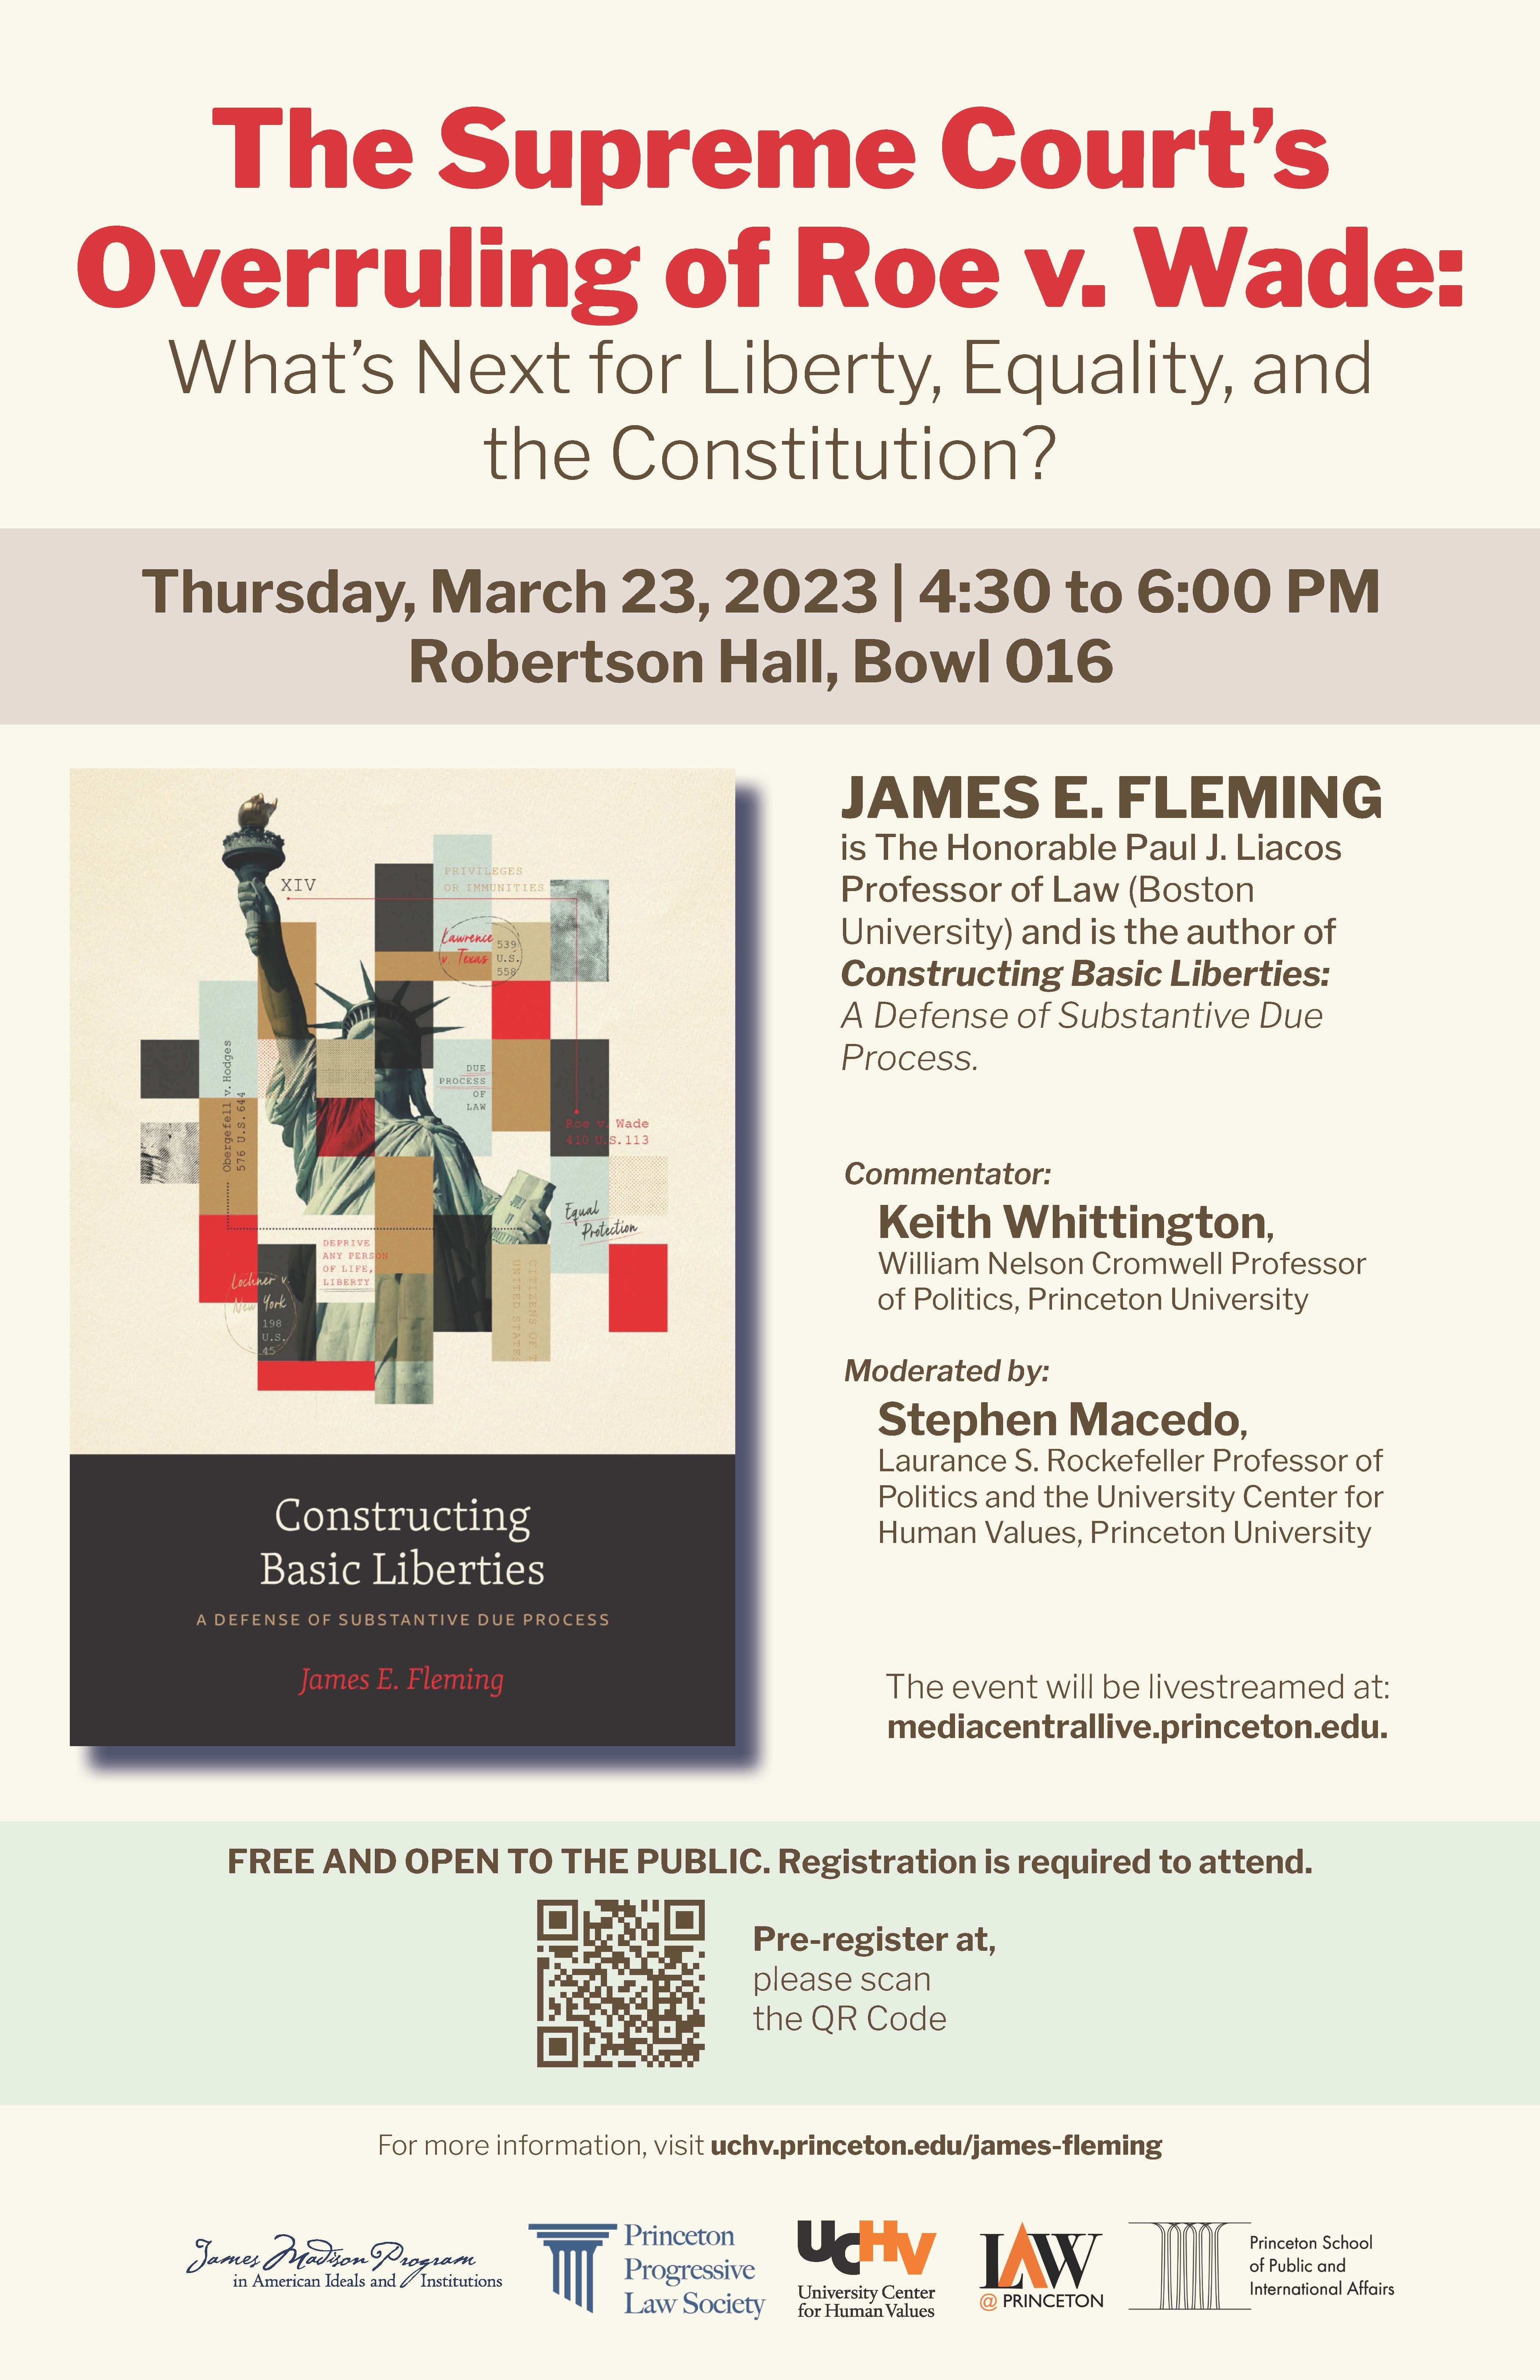 The Supreme Court’s Overruling of Roe v. Wade: What’s Next for Liberty, Equality, and the Constitution event flyer